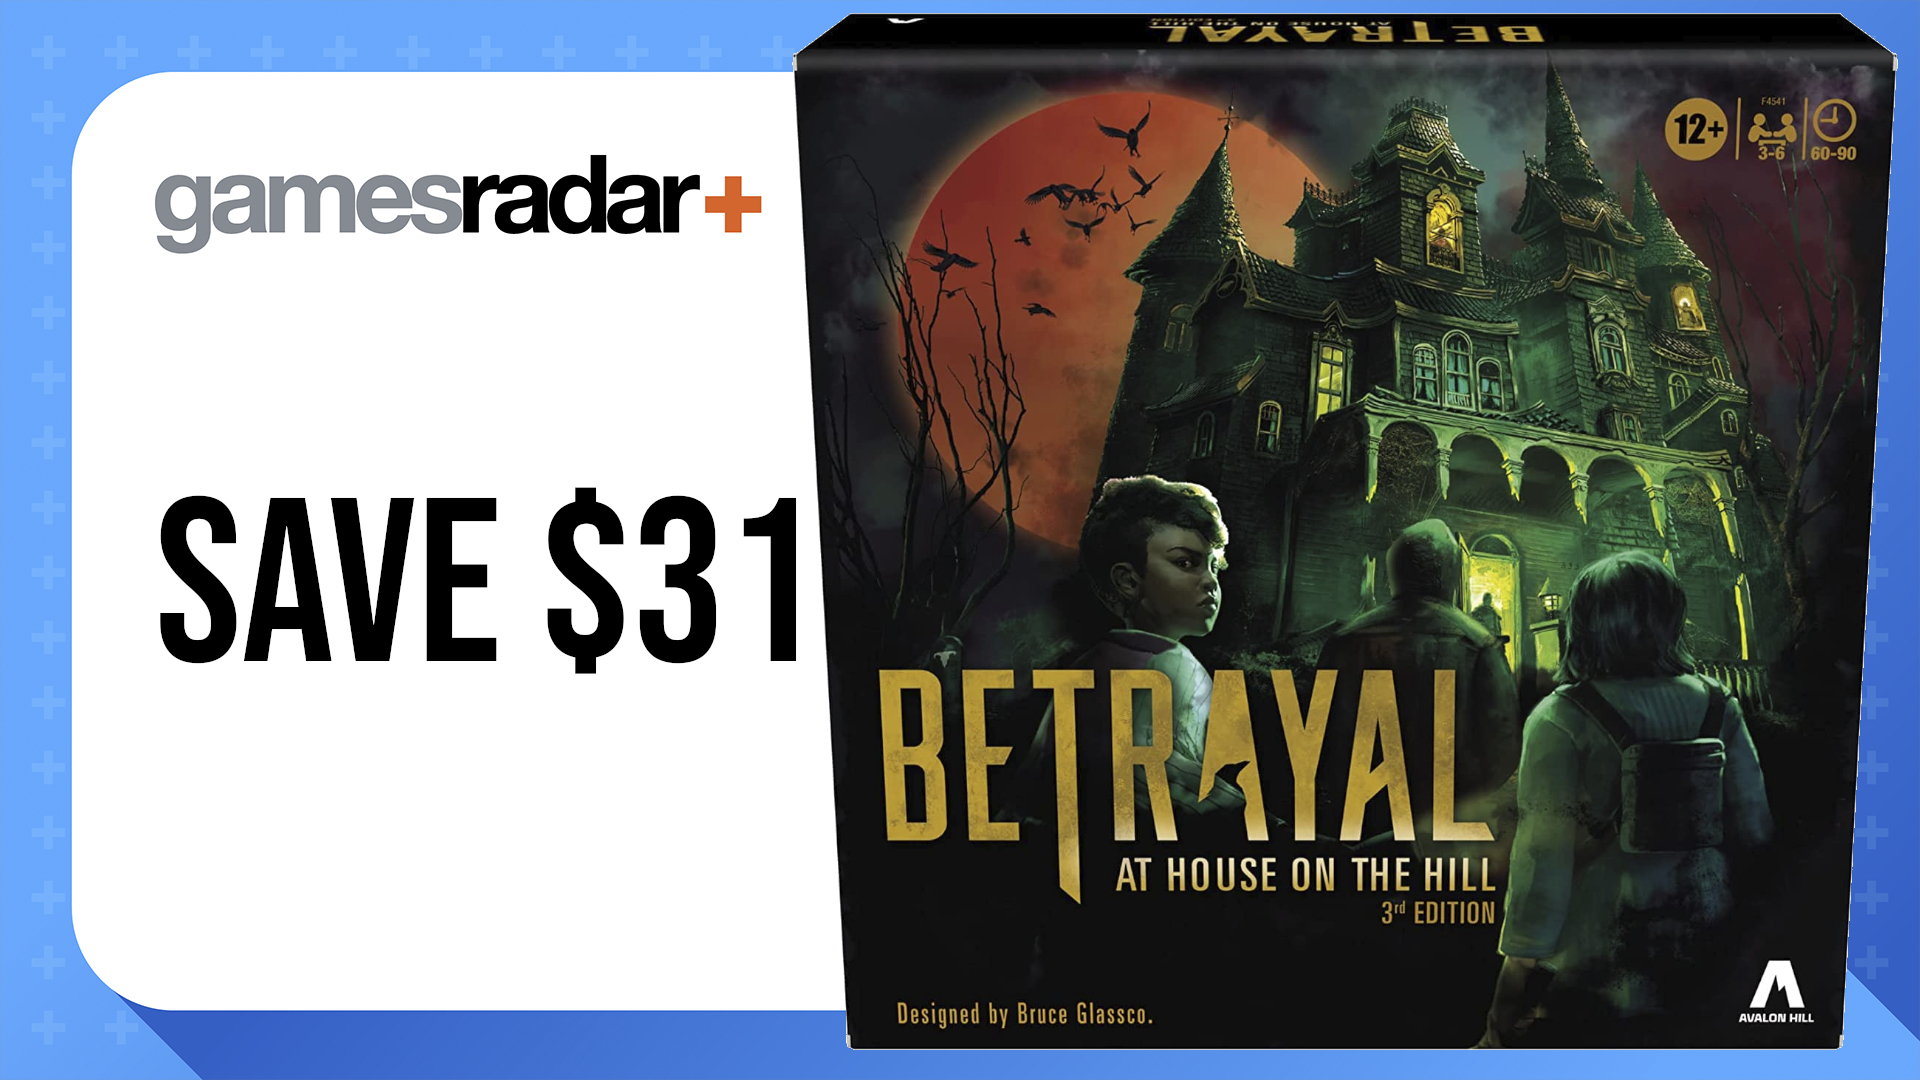 Cyber Monday board game deals with Betrayal at House on the Hill 3rd Edition